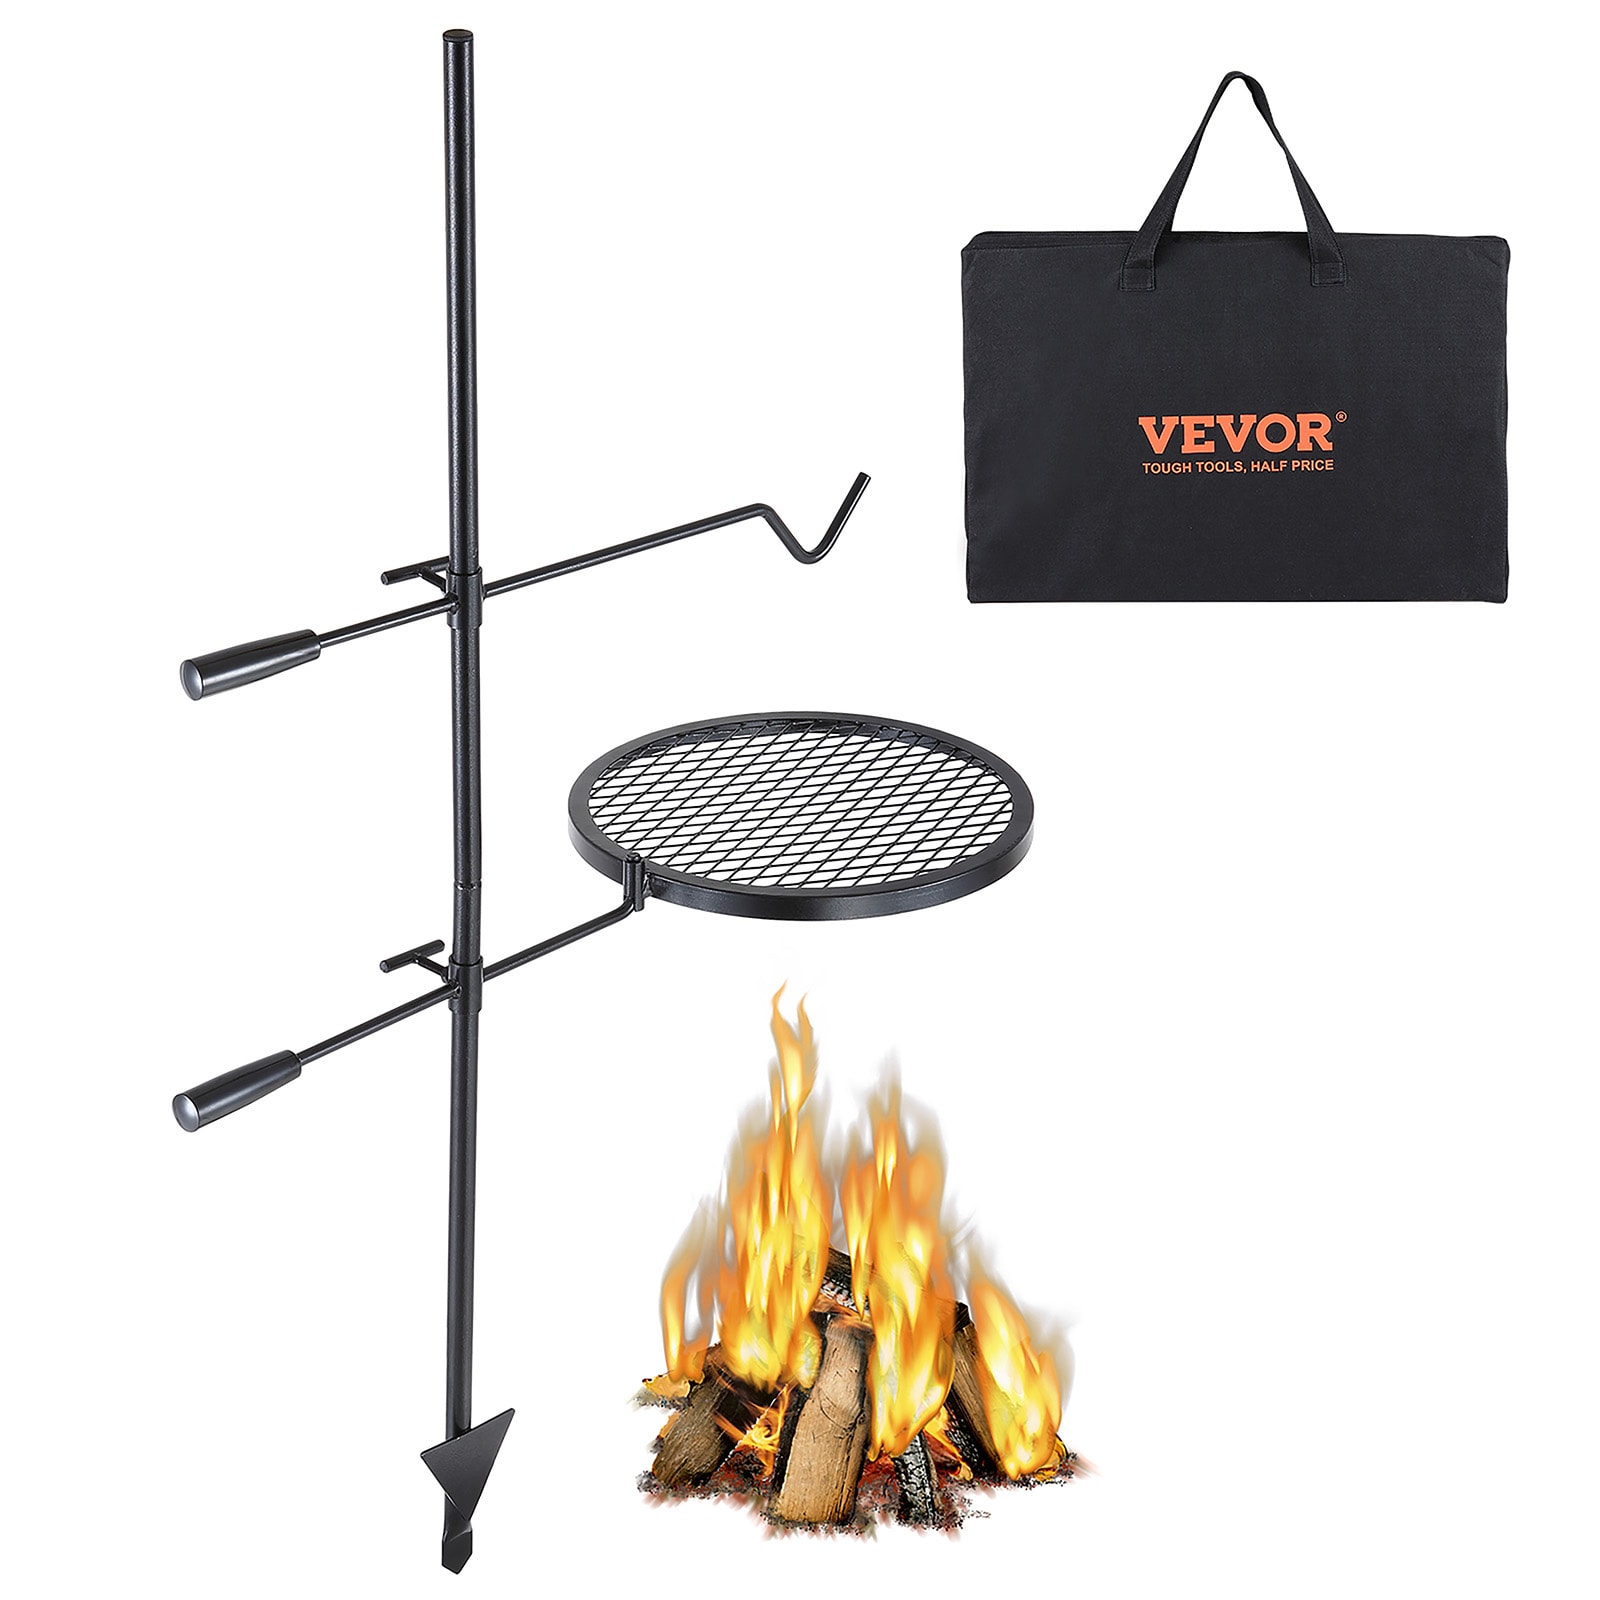 Dutch camp oven grate stand with grill, cooking, campfire, camping + handle  !